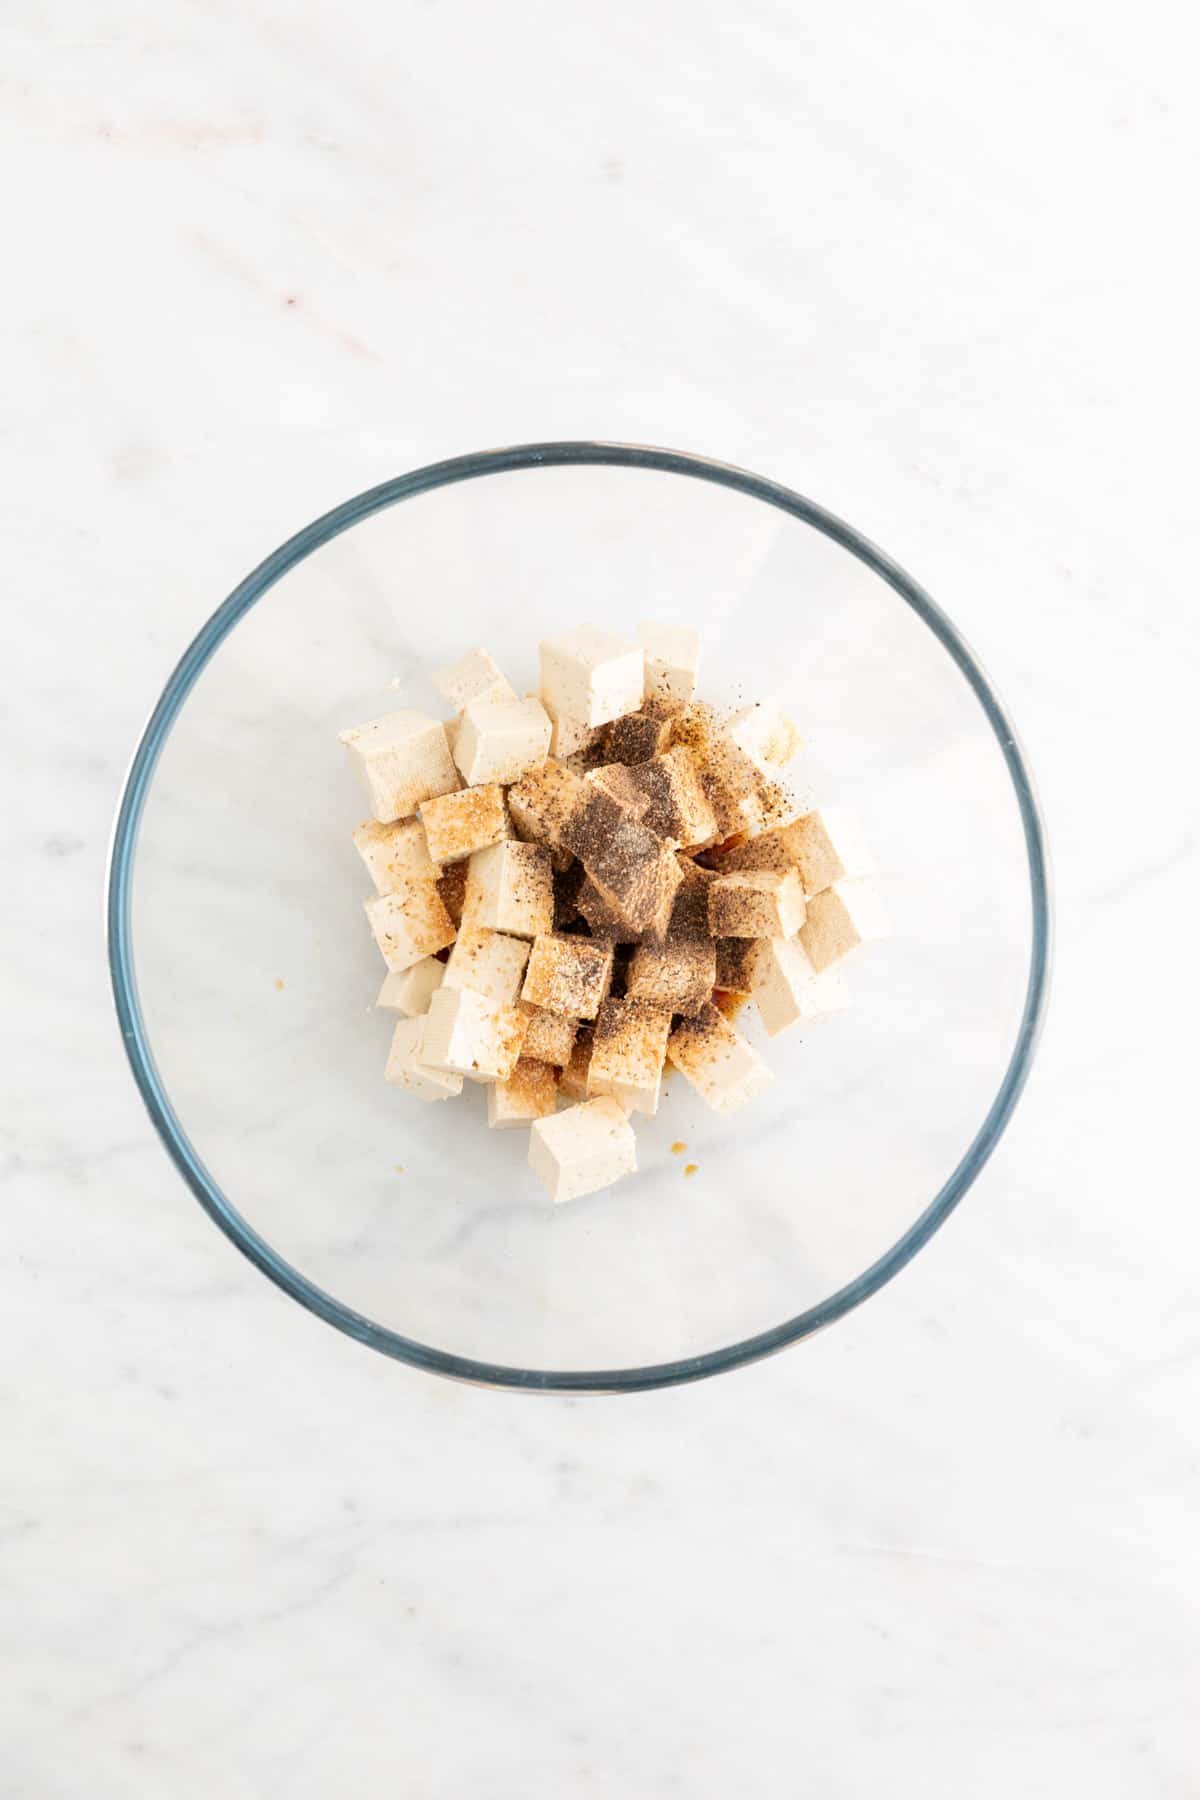 Tofu cubes in a large mixing bowl with some seasonings on top.